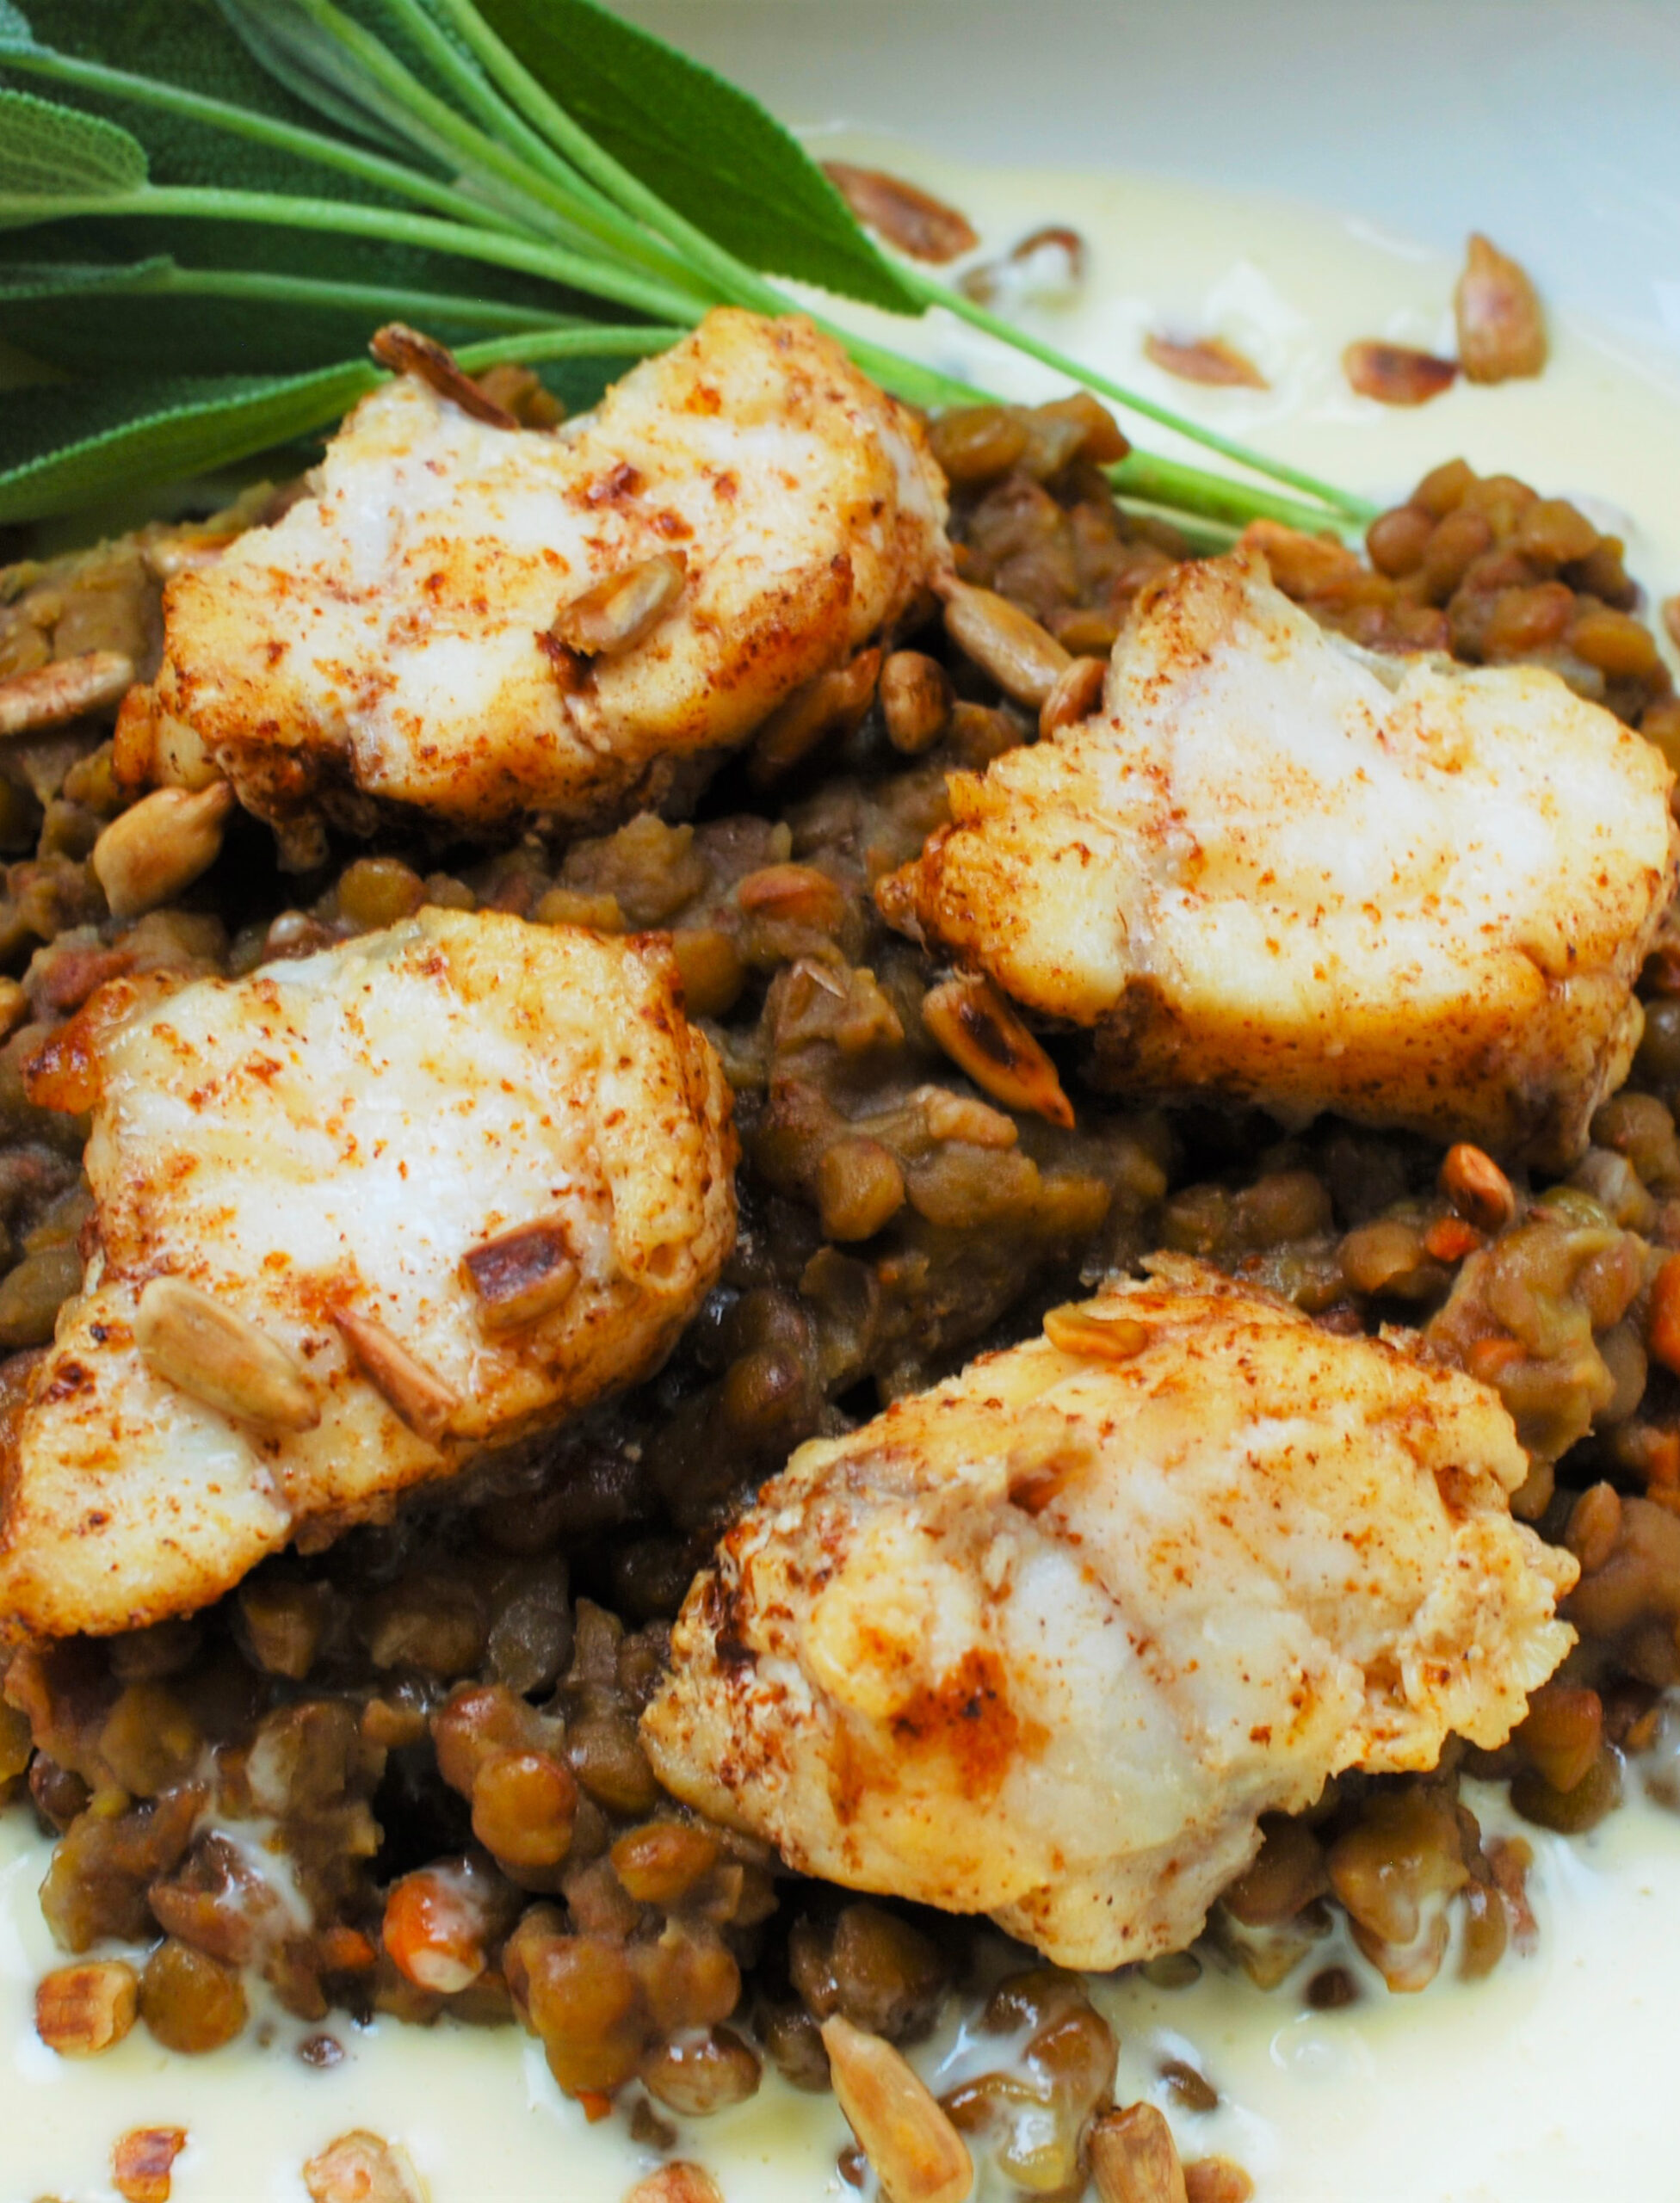 Monkfish Medallions with Lentils and Chaource Cream - Women of Today